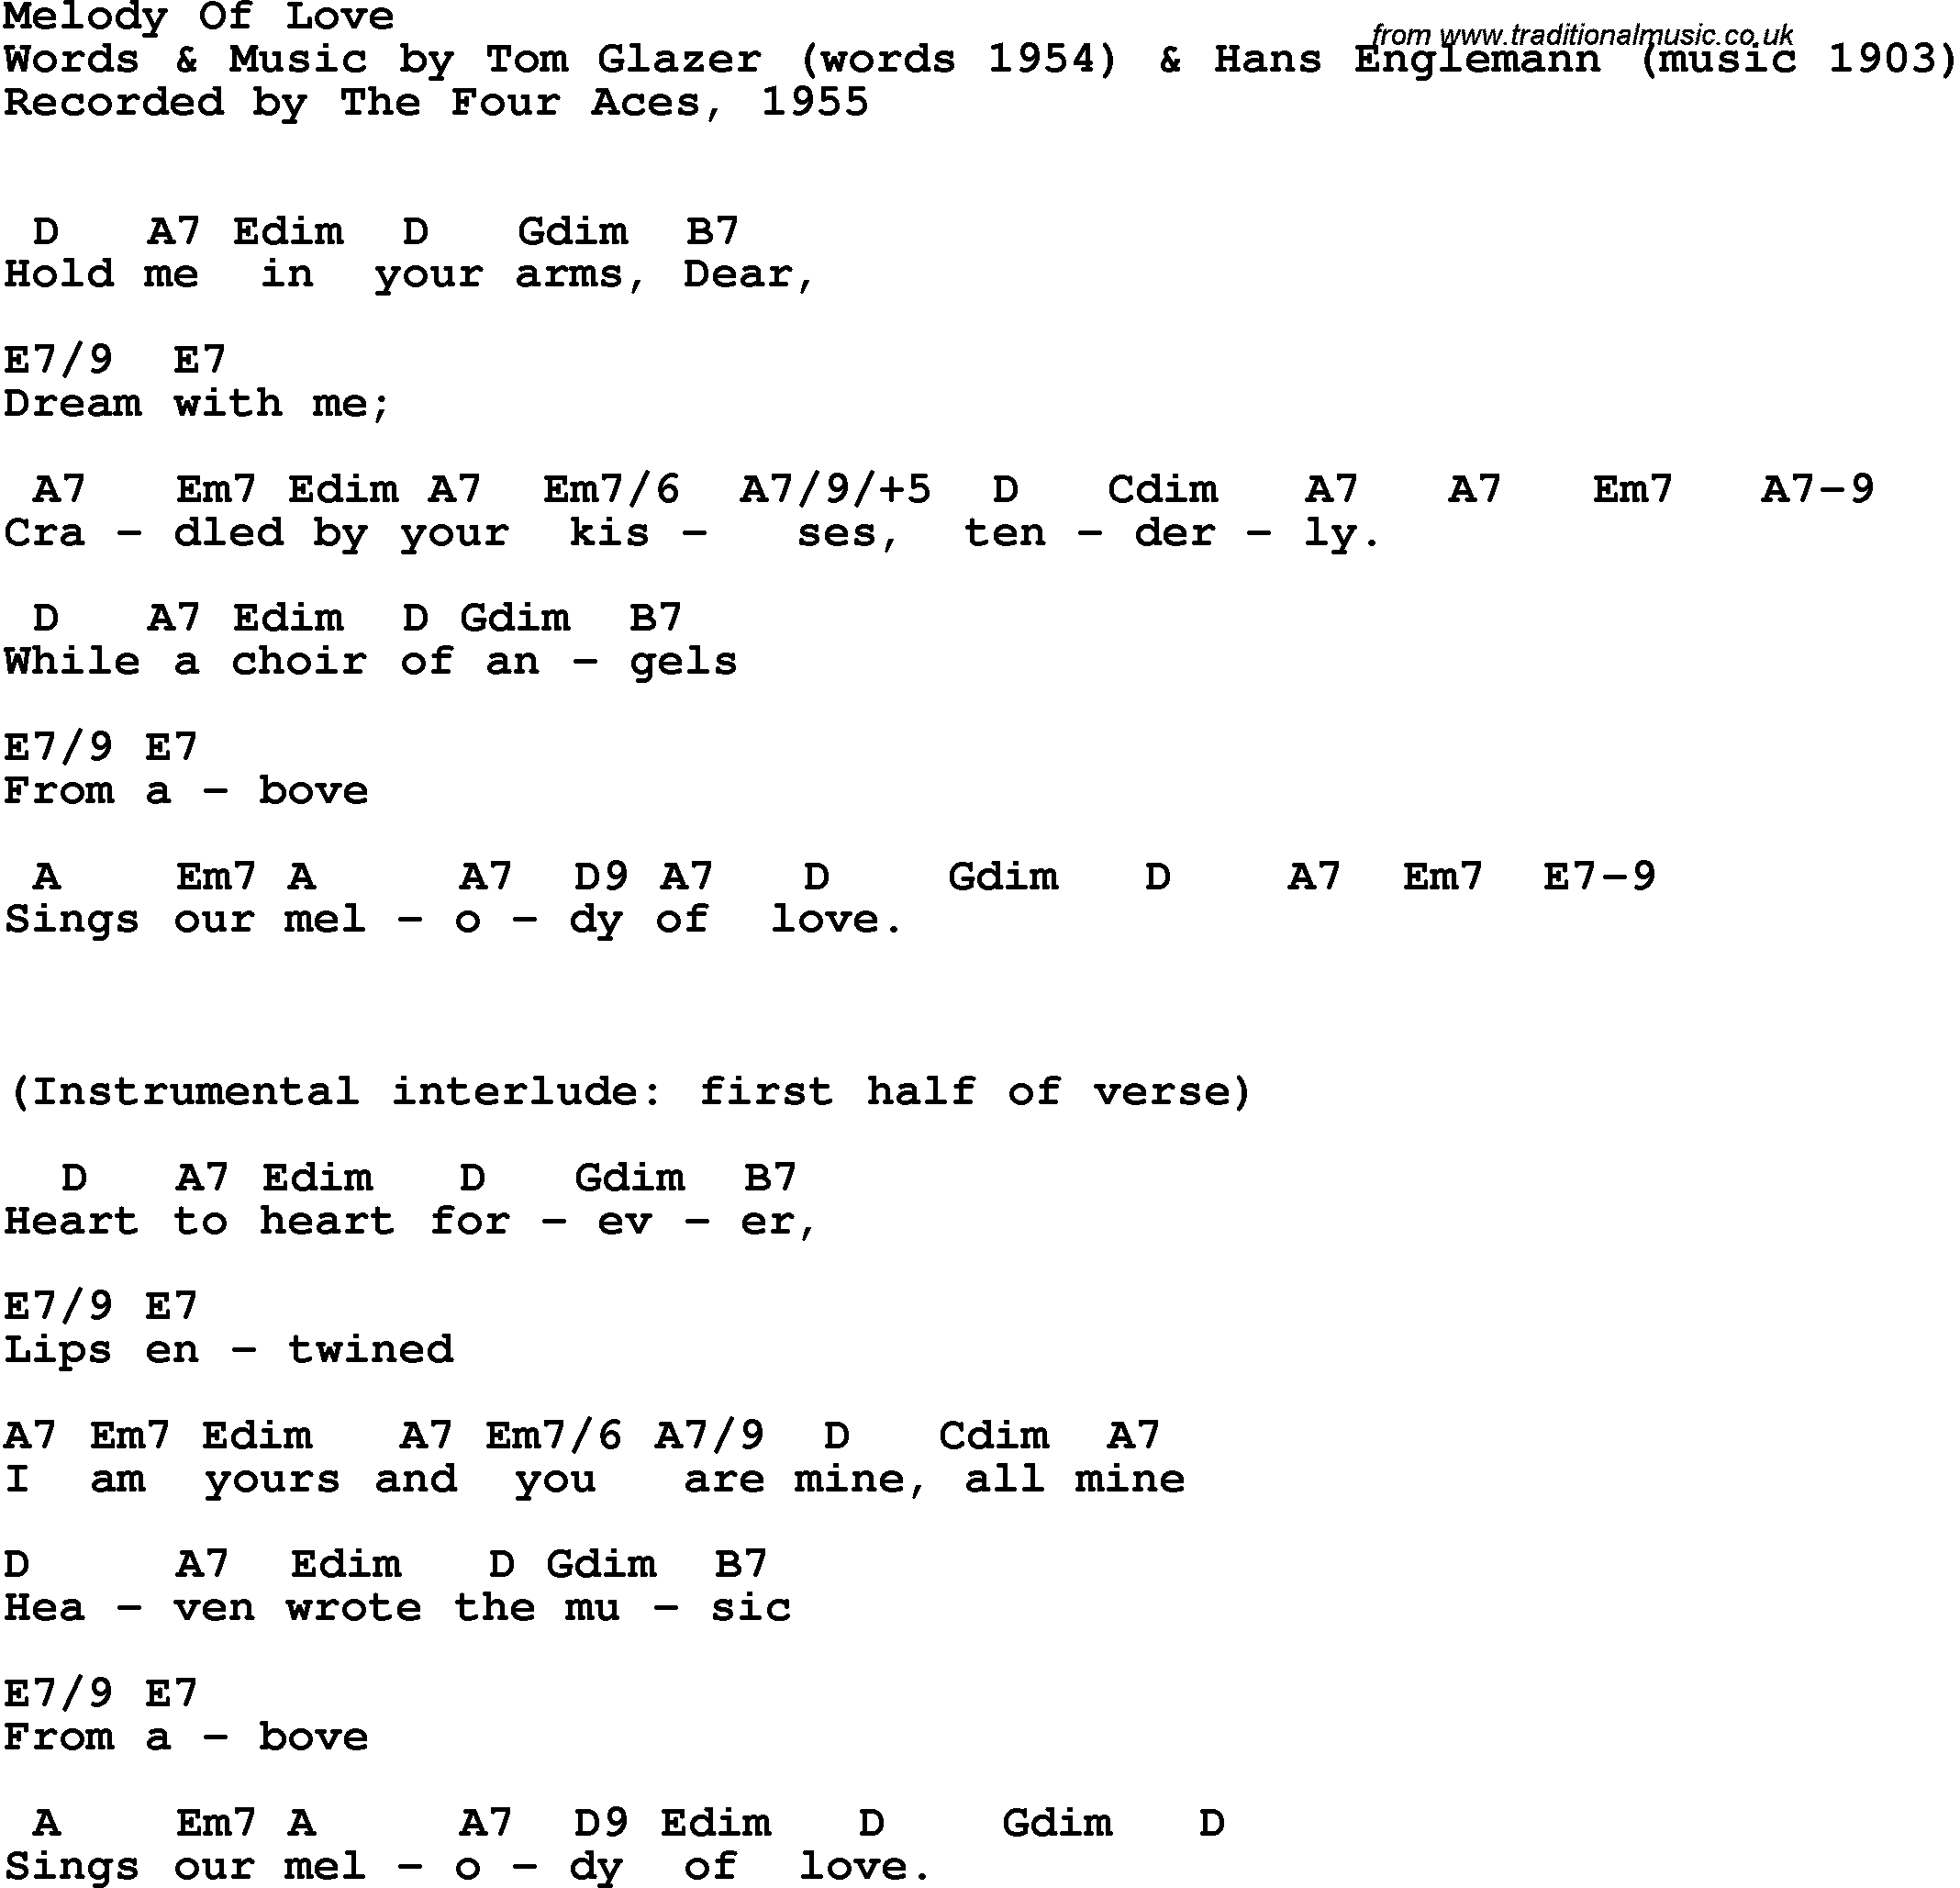 Song Lyrics with guitar chords for Melody Of Love - The Four Aces, 1955